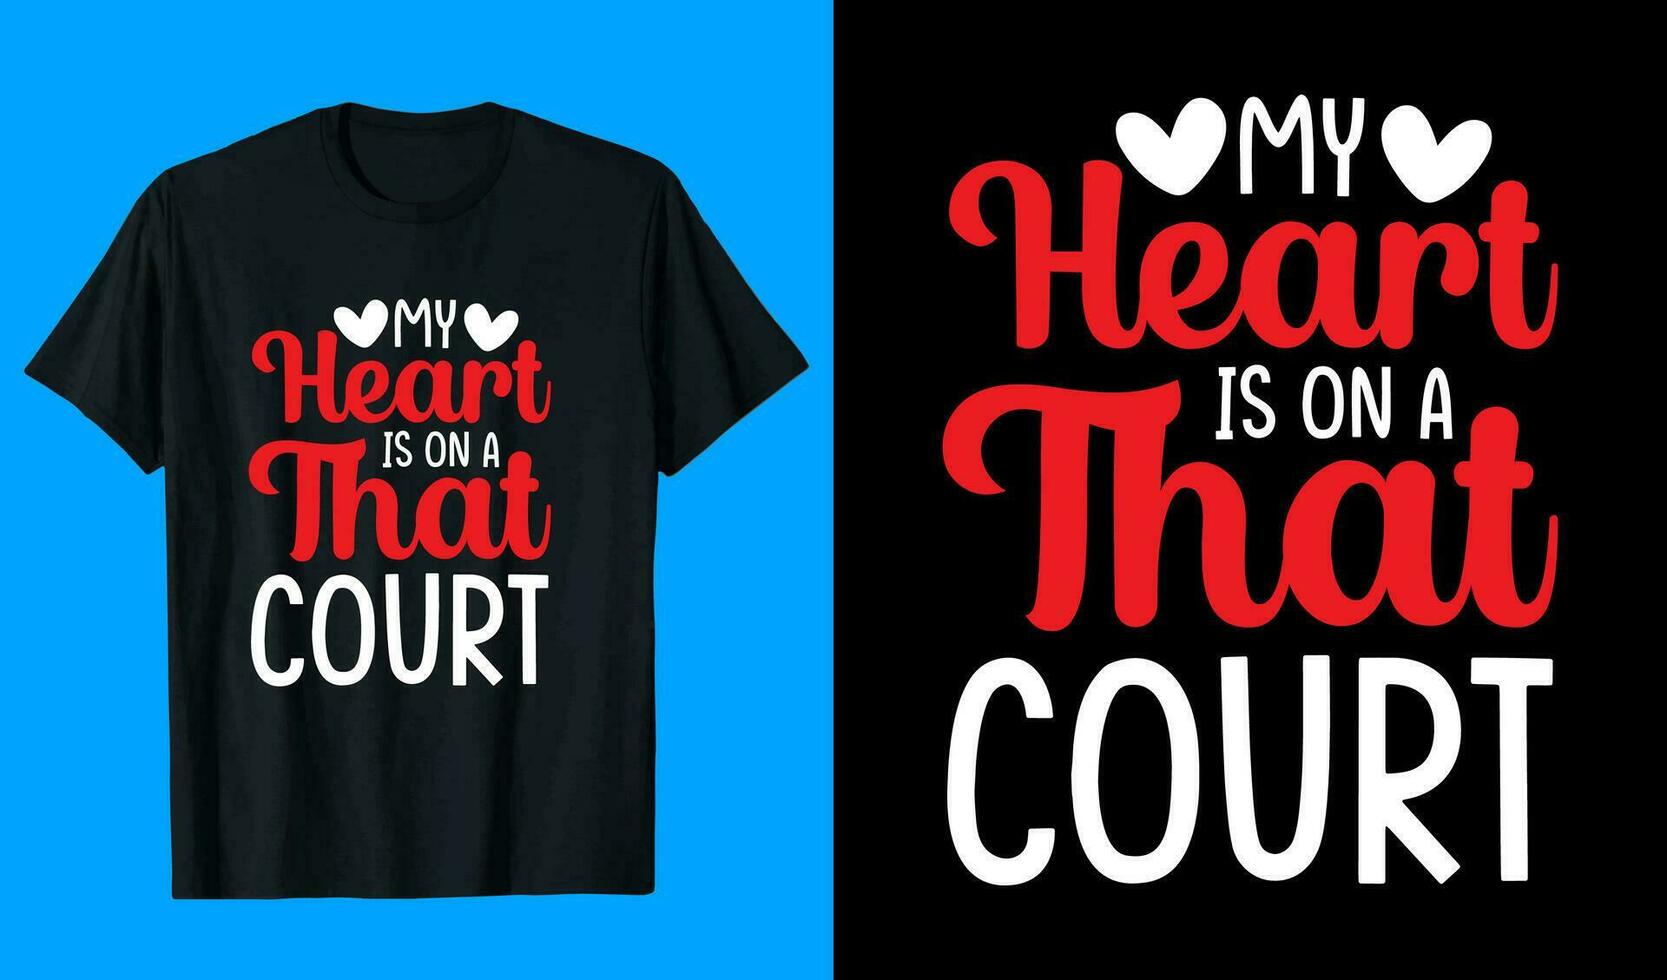 My heart is on a that court T shirt design vector